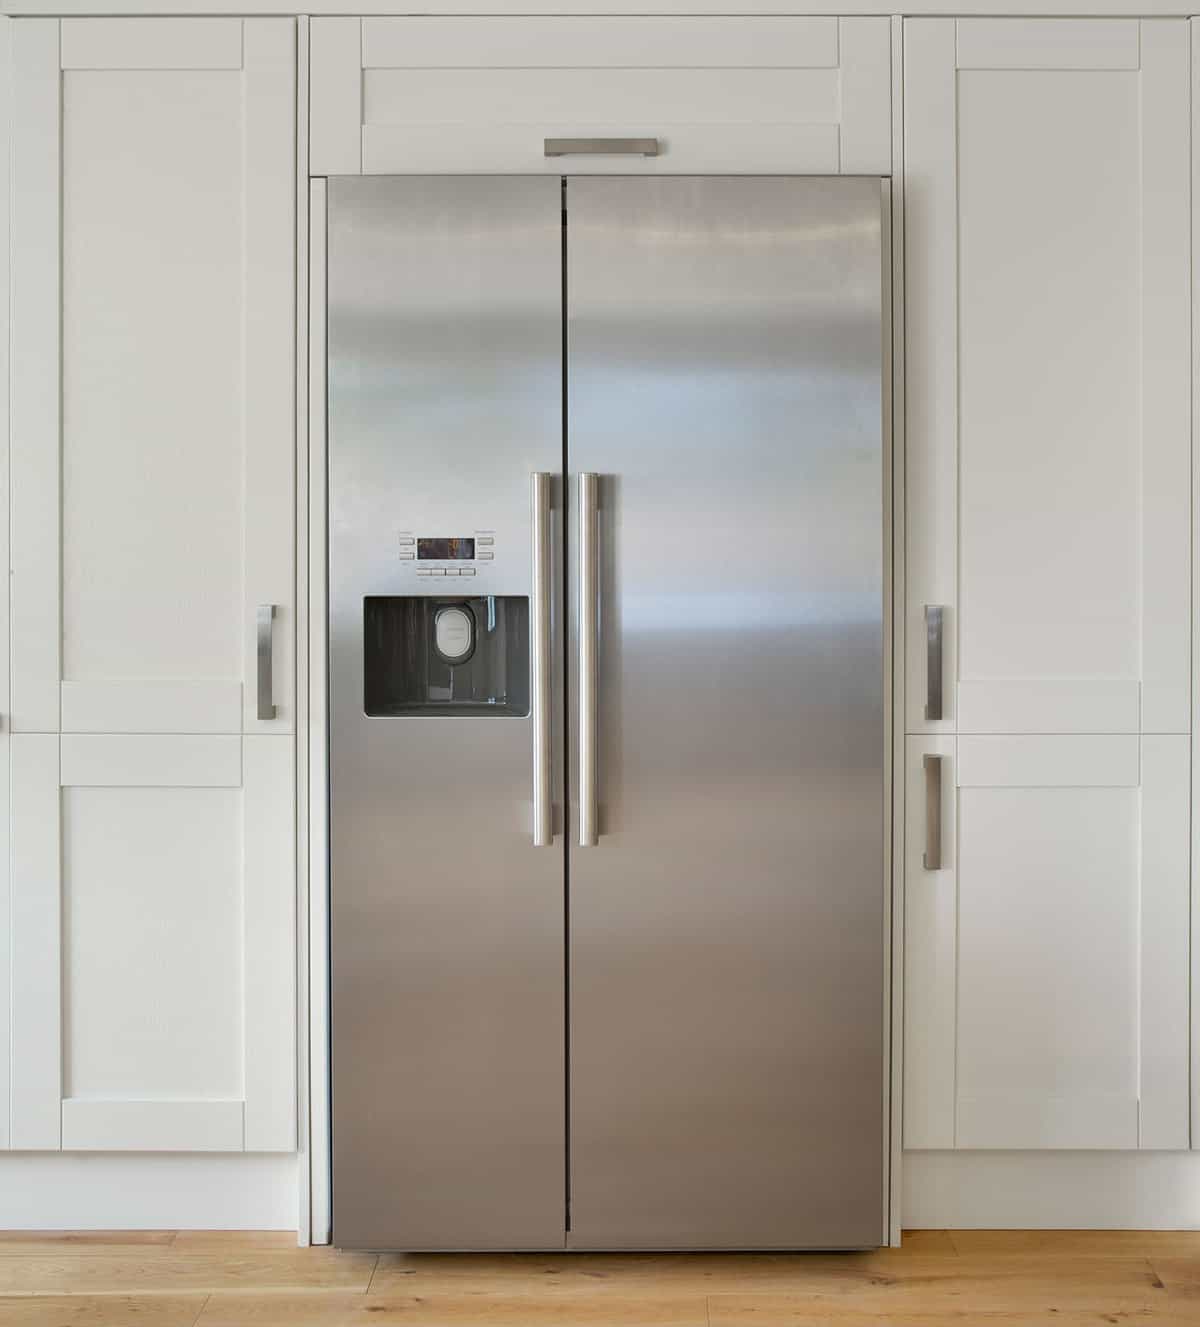 A modern American fridge freezer set into a bank of cream colored cupboards in a farmhouse-style kitchen